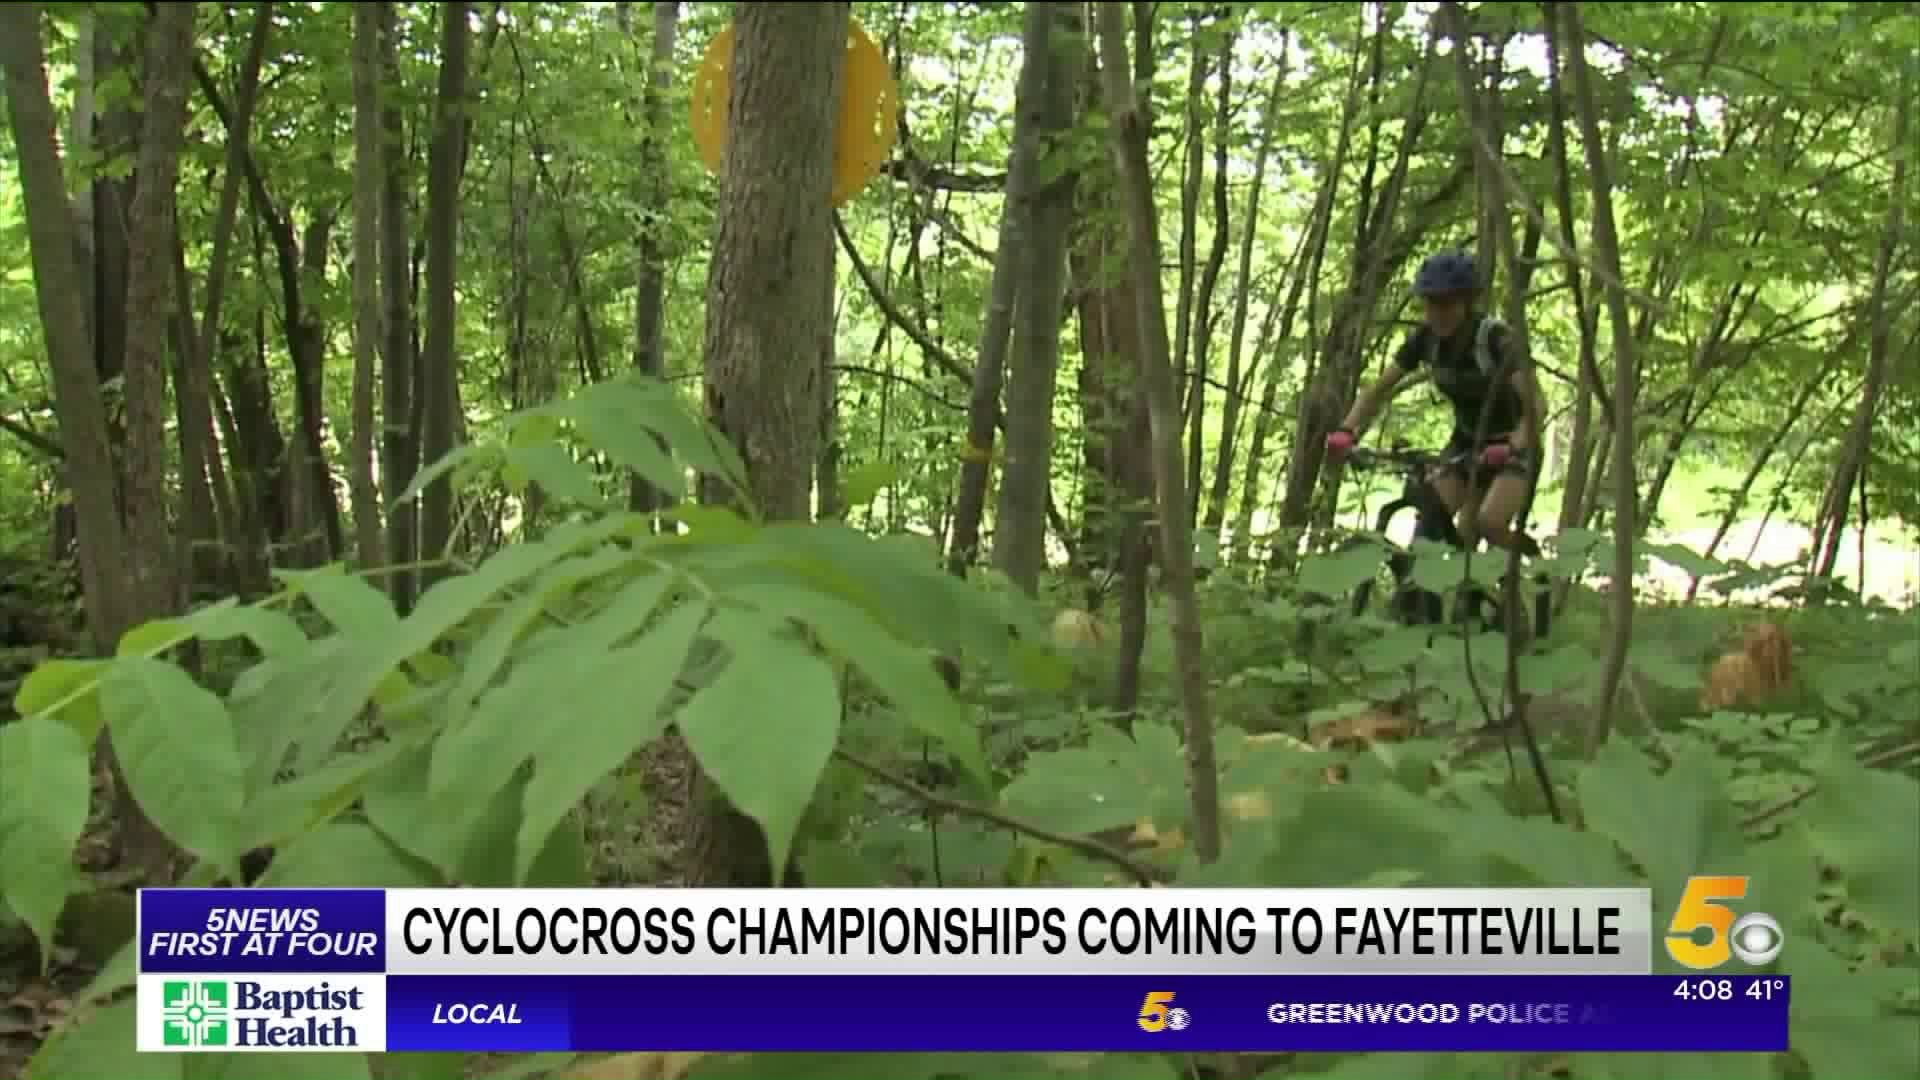 Fayetteville To Host 2020 Pan-American Cyclocross Championships